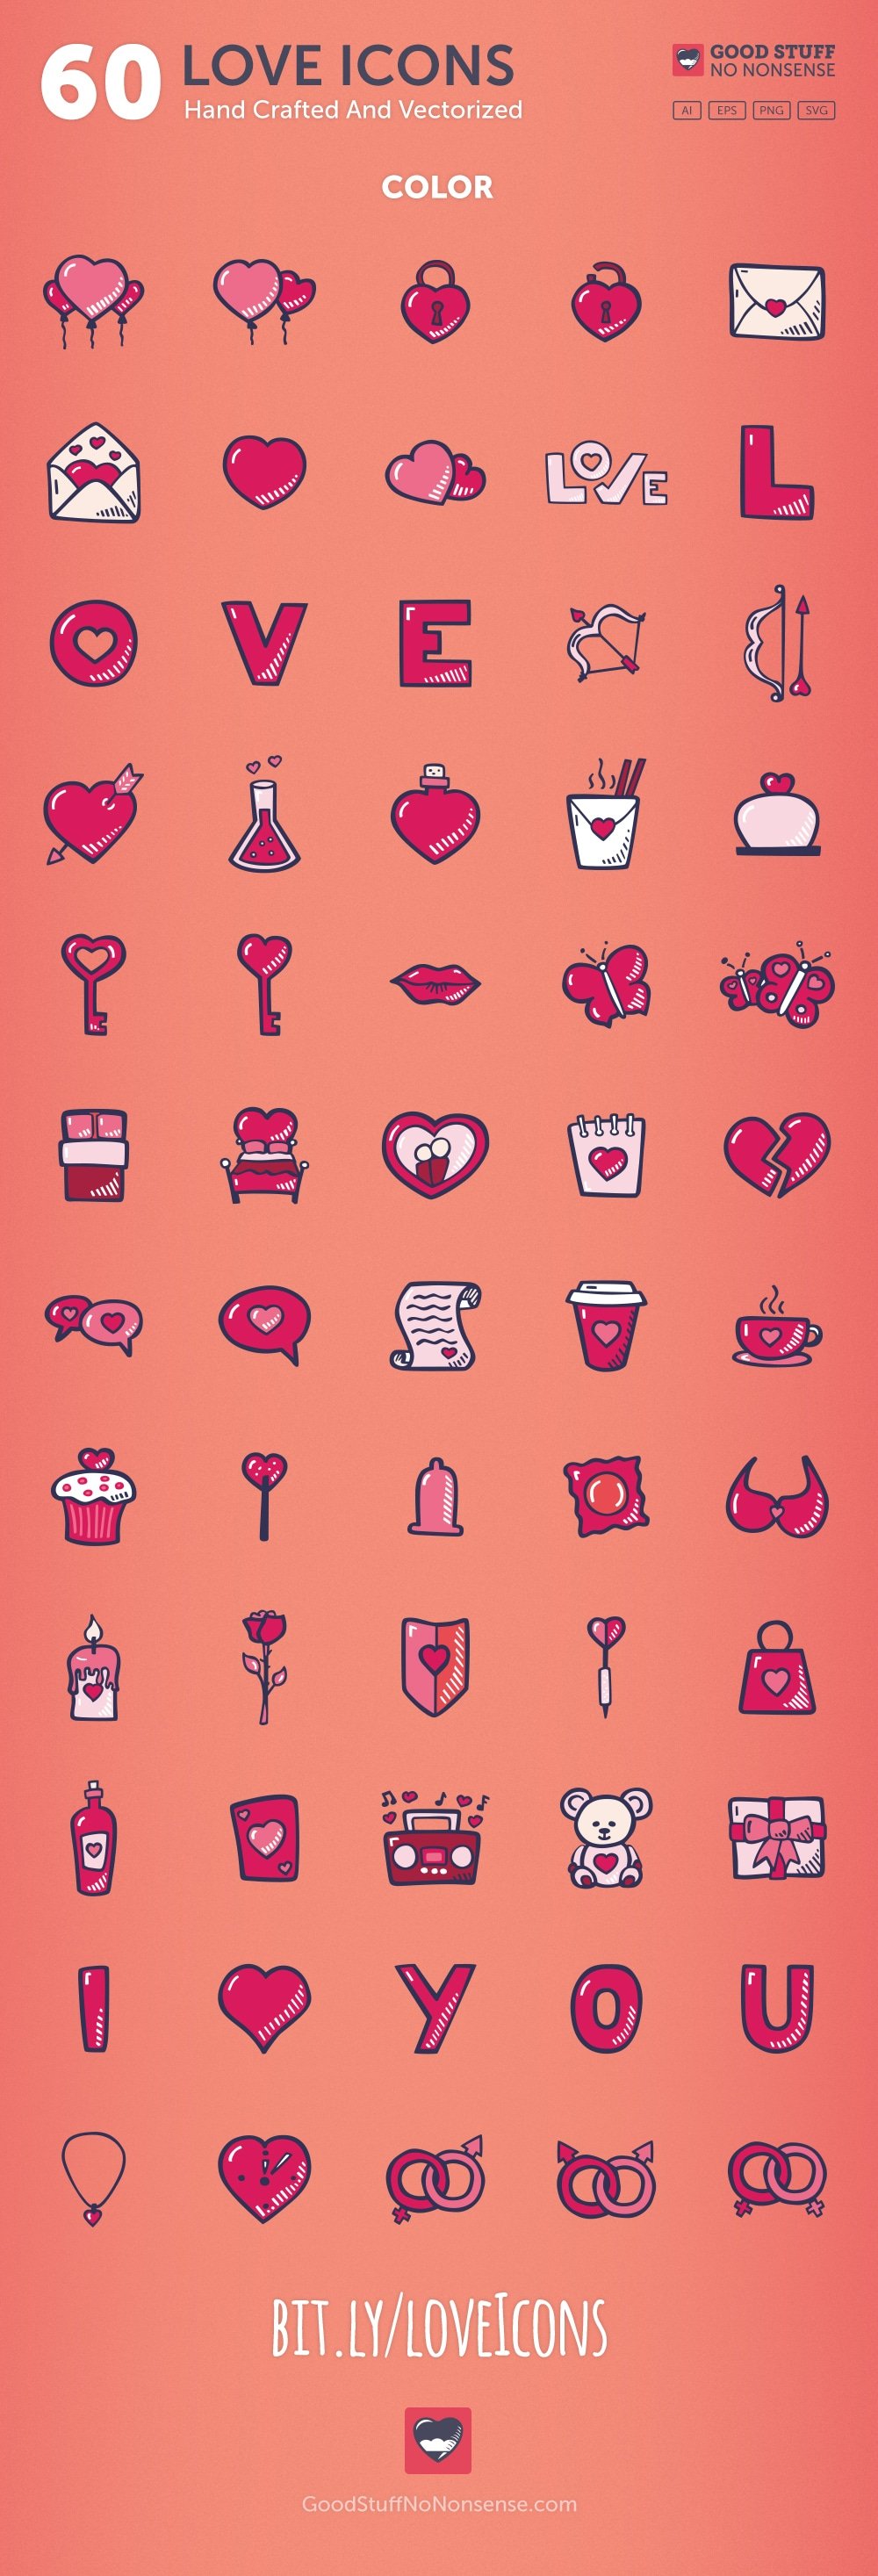 A set of 60 different color white-pink hand drawn icons on a pink background.